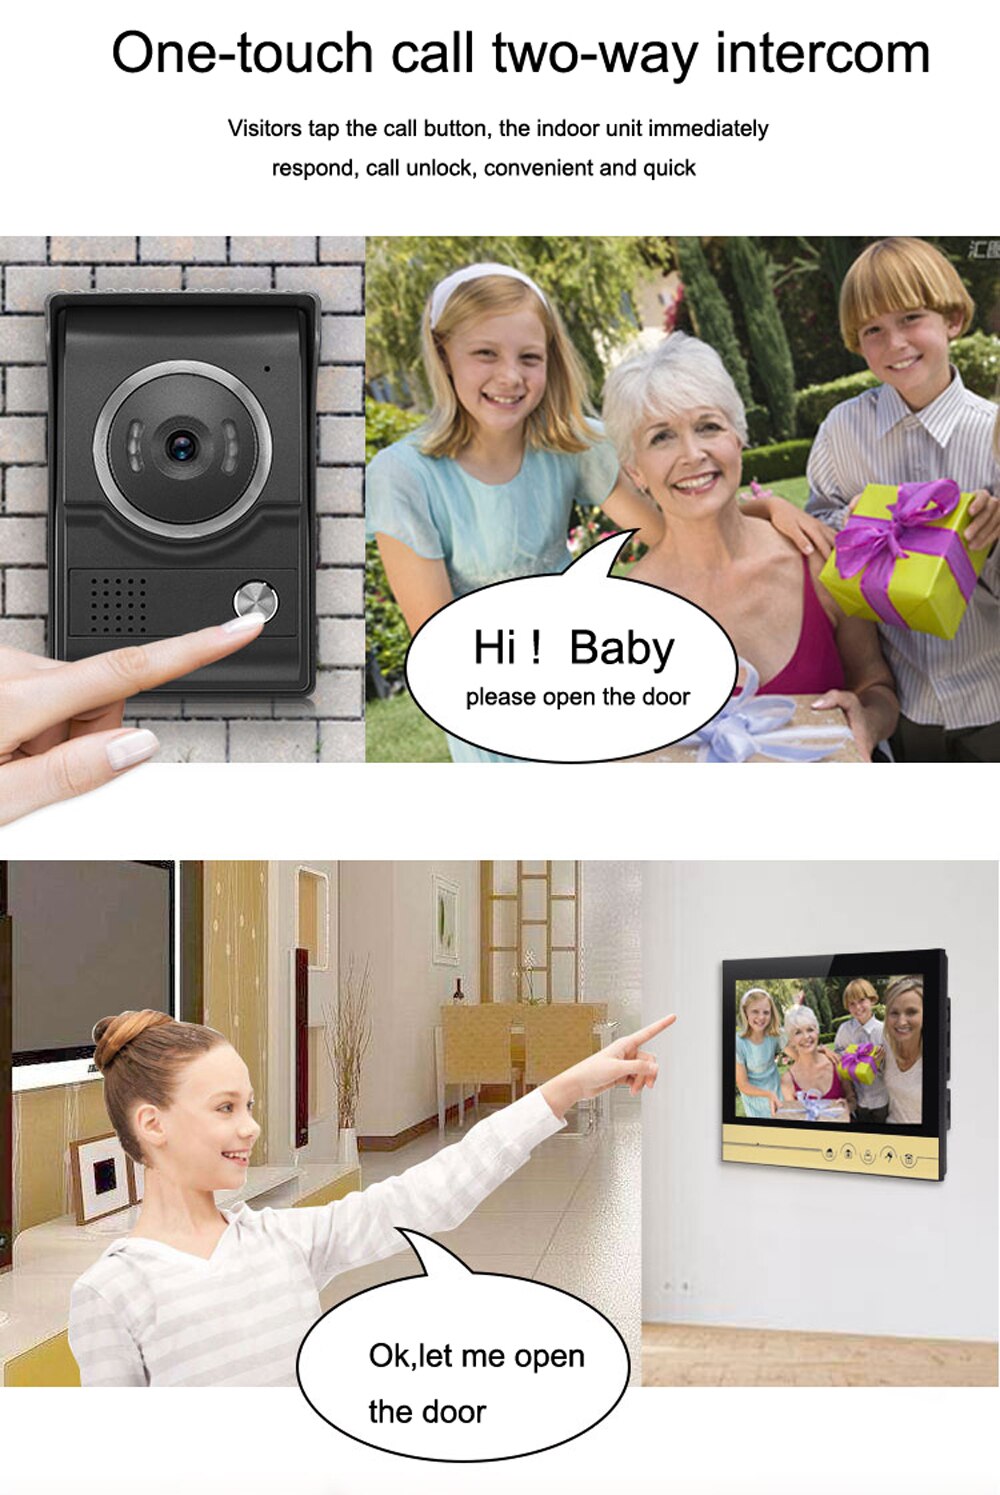 function about indoor monitor and outdoor camera  80 Degree 700TVL HD Color Door Phone Camera Unit For Home Video Doorphone Intercom Access Control System